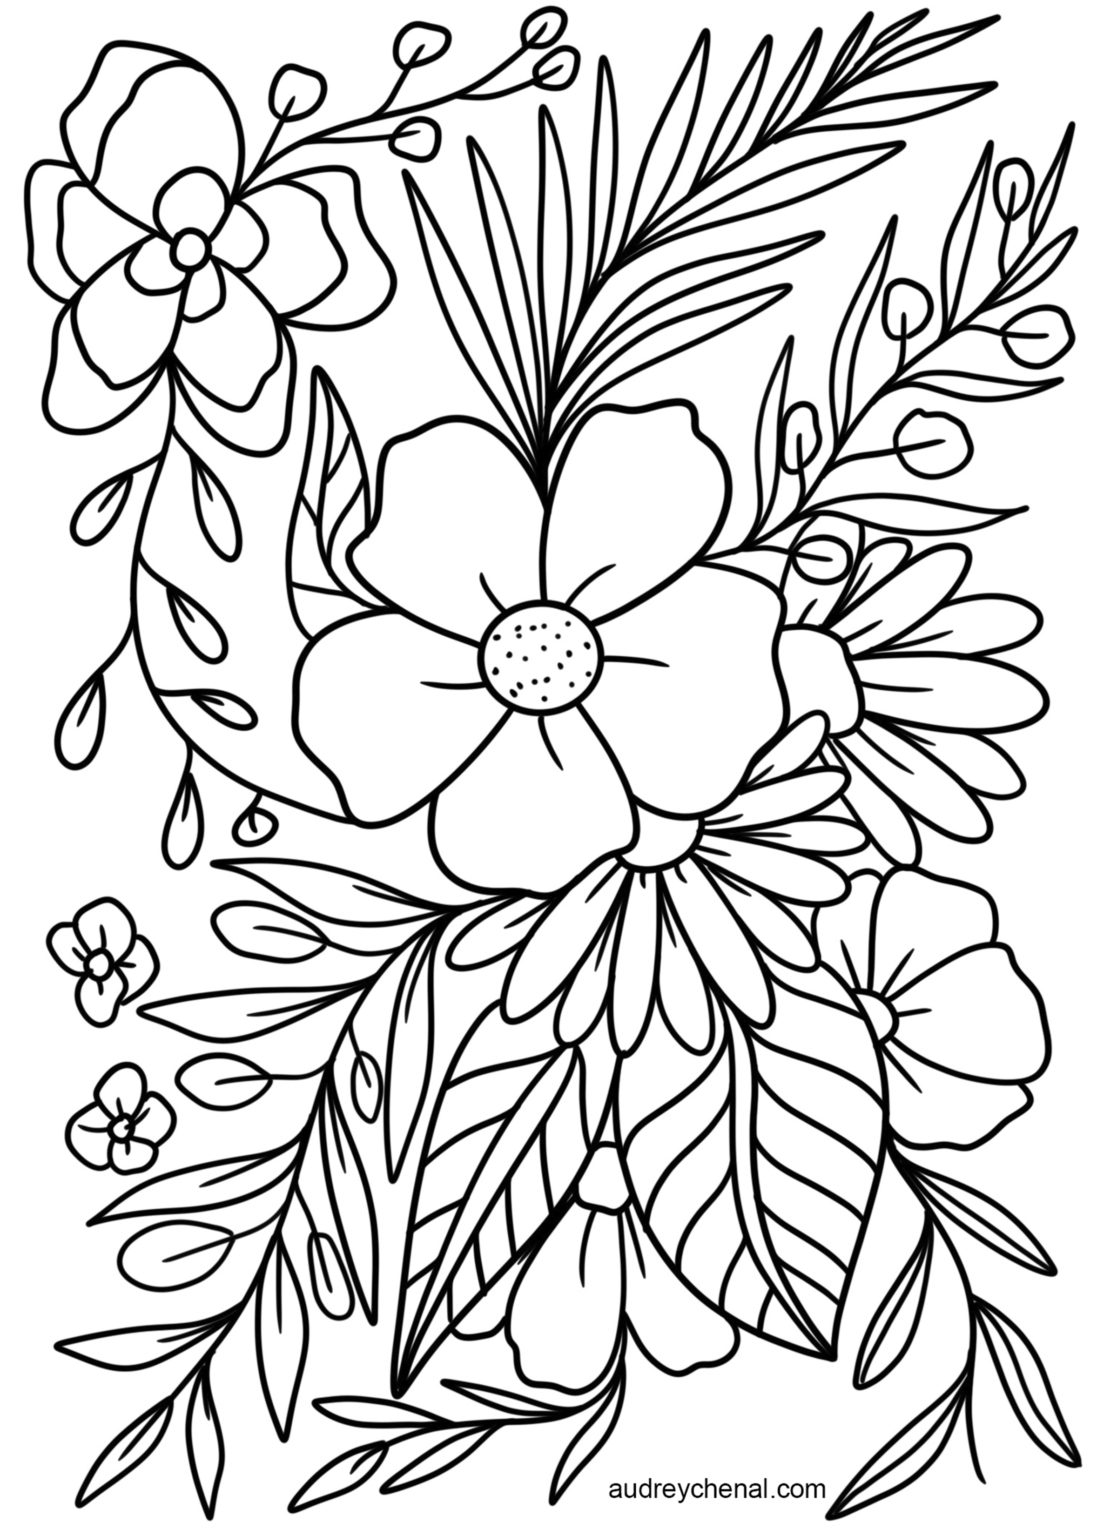 FREE Floral Coloring Page Instant Digital Download